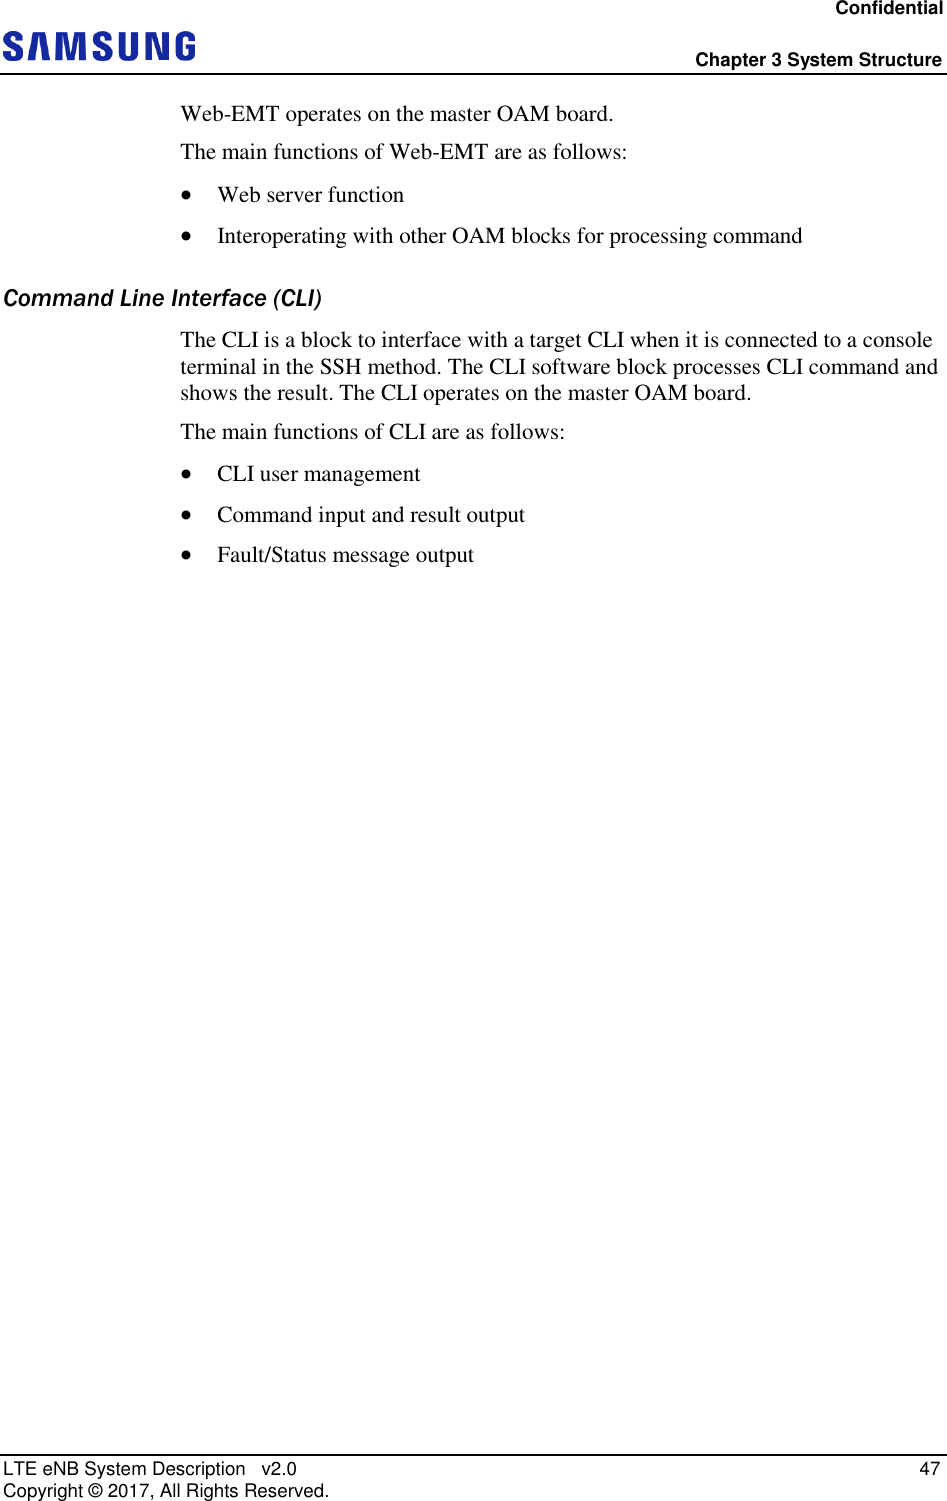 Confidential  Chapter 3 System Structure LTE eNB System Description   v2.0   47 Copyright ©  2017, All Rights Reserved. Web-EMT operates on the master OAM board. The main functions of Web-EMT are as follows:  Web server function  Interoperating with other OAM blocks for processing command Command Line Interface (CLI) The CLI is a block to interface with a target CLI when it is connected to a console terminal in the SSH method. The CLI software block processes CLI command and shows the result. The CLI operates on the master OAM board. The main functions of CLI are as follows:  CLI user management  Command input and result output  Fault/Status message output 